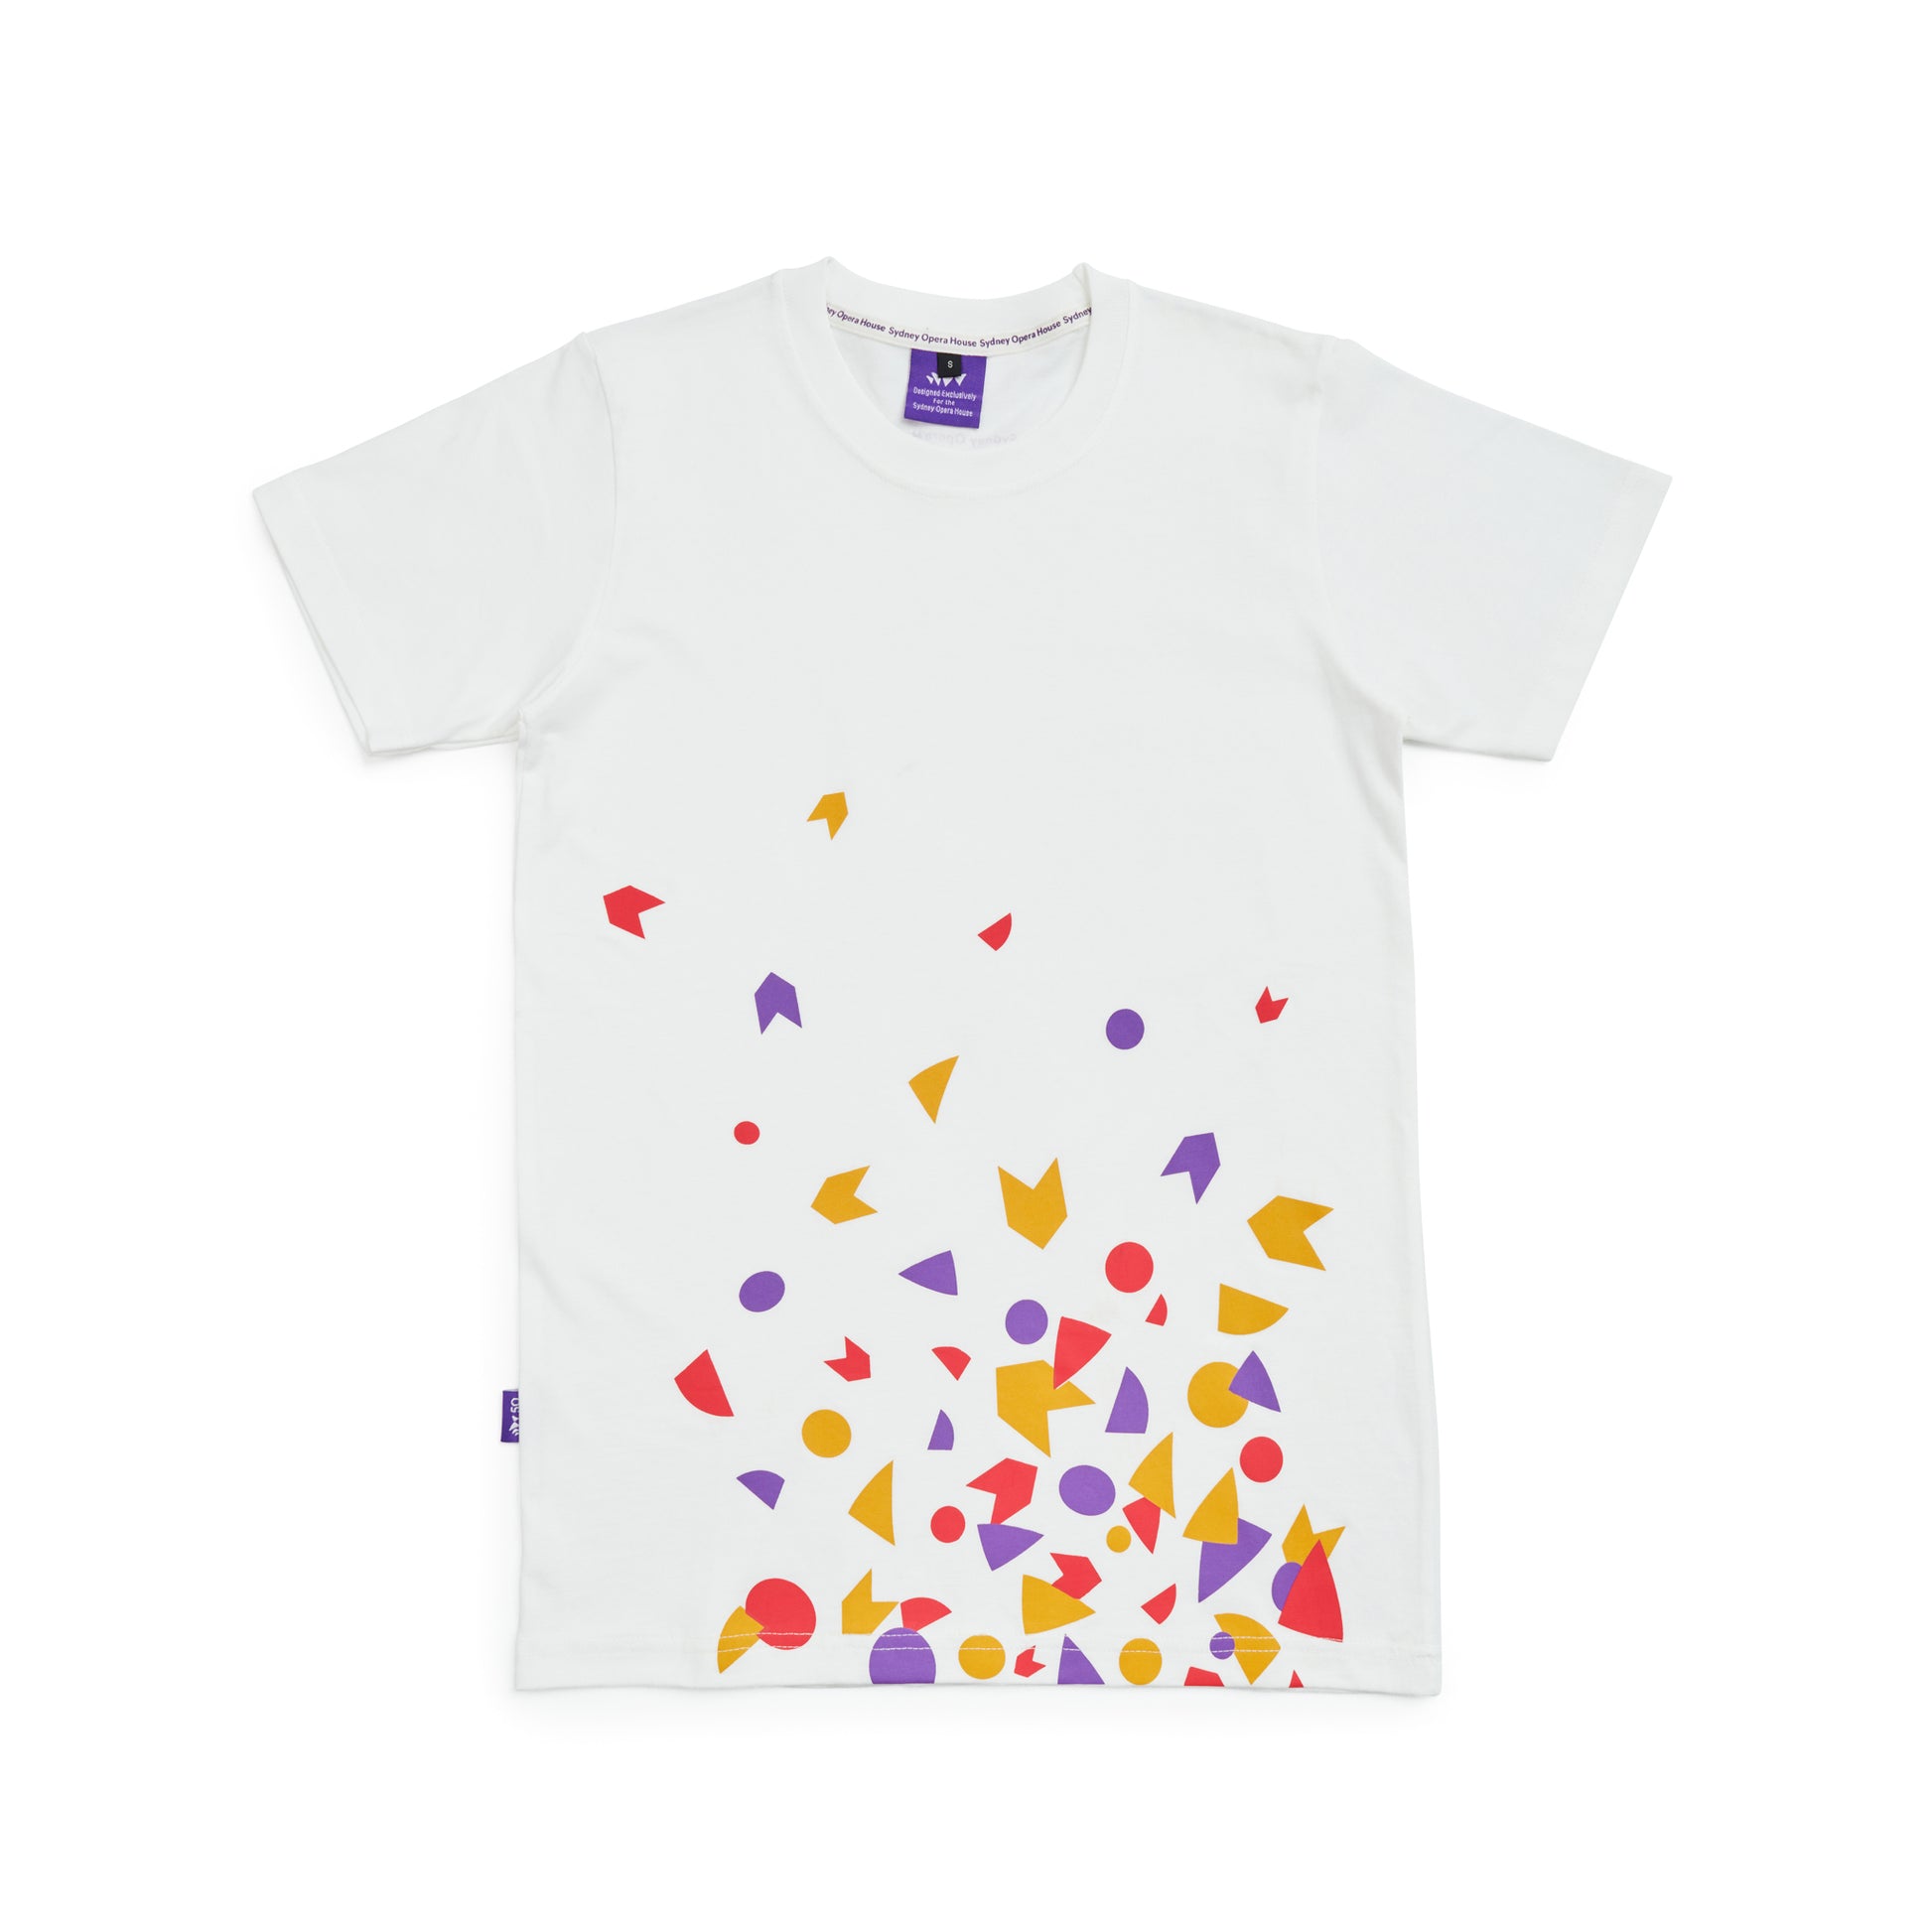 Sydney Opera House 50th anniversary celebration tee with colourful shapes